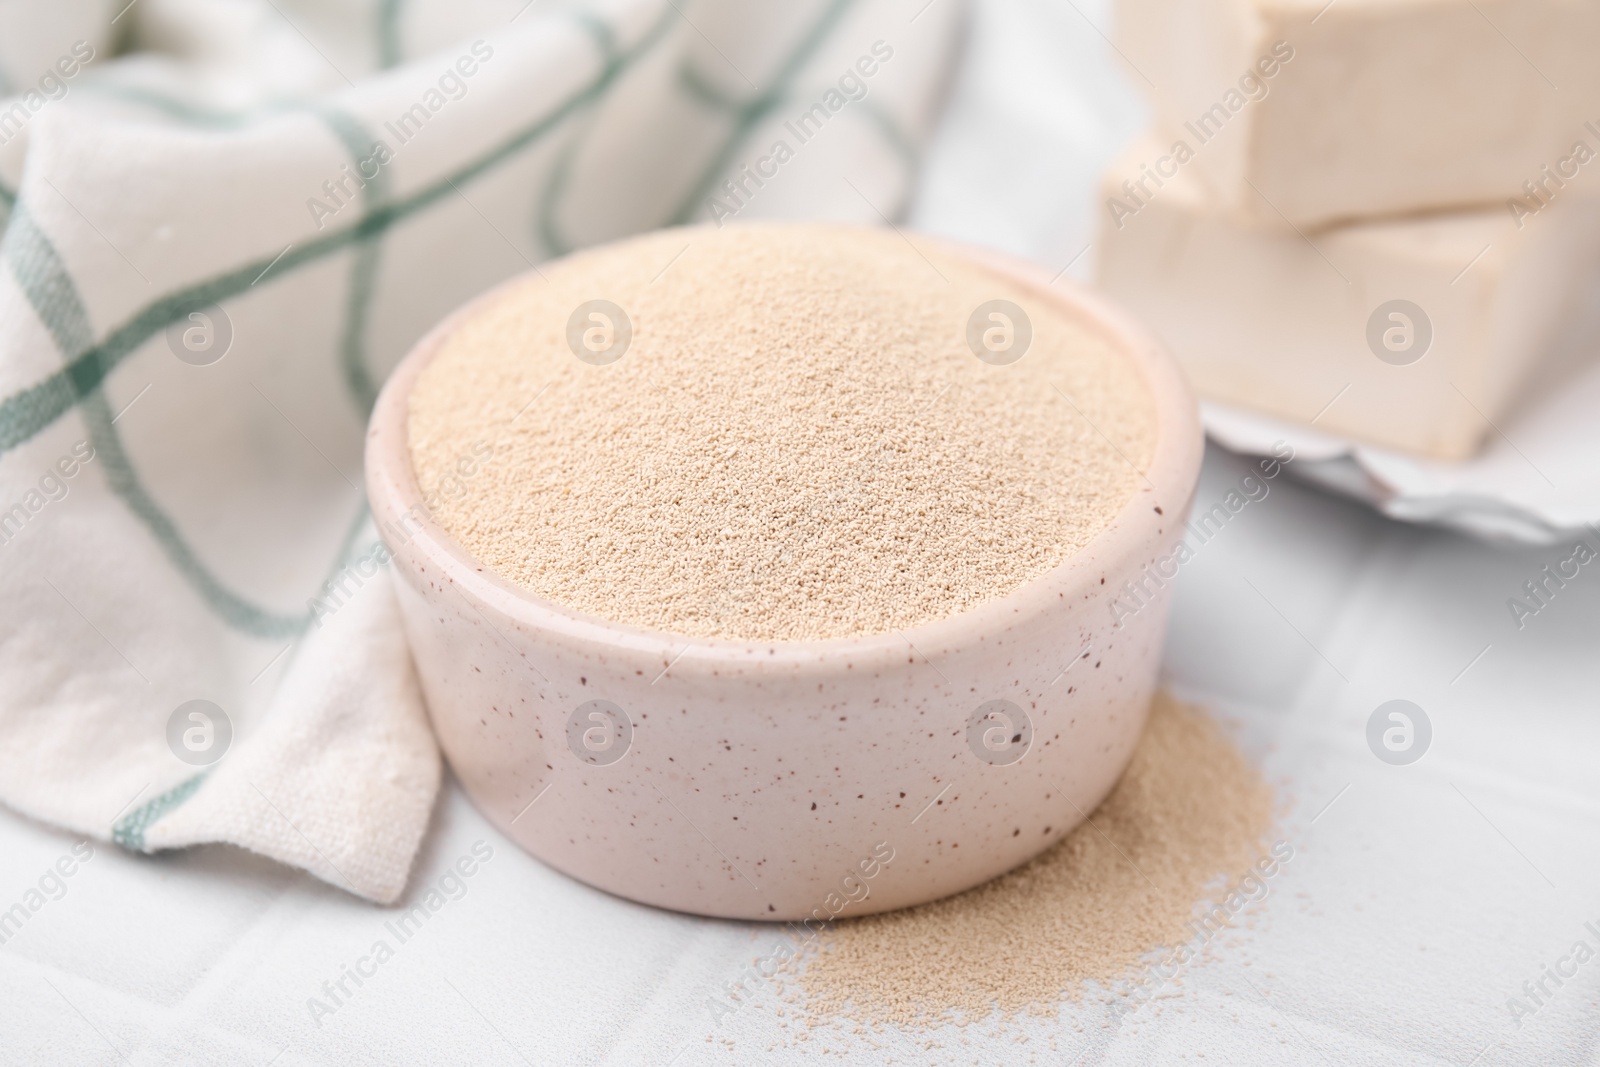 Photo of Granulated yeast in bowl on white tiled table, closeup